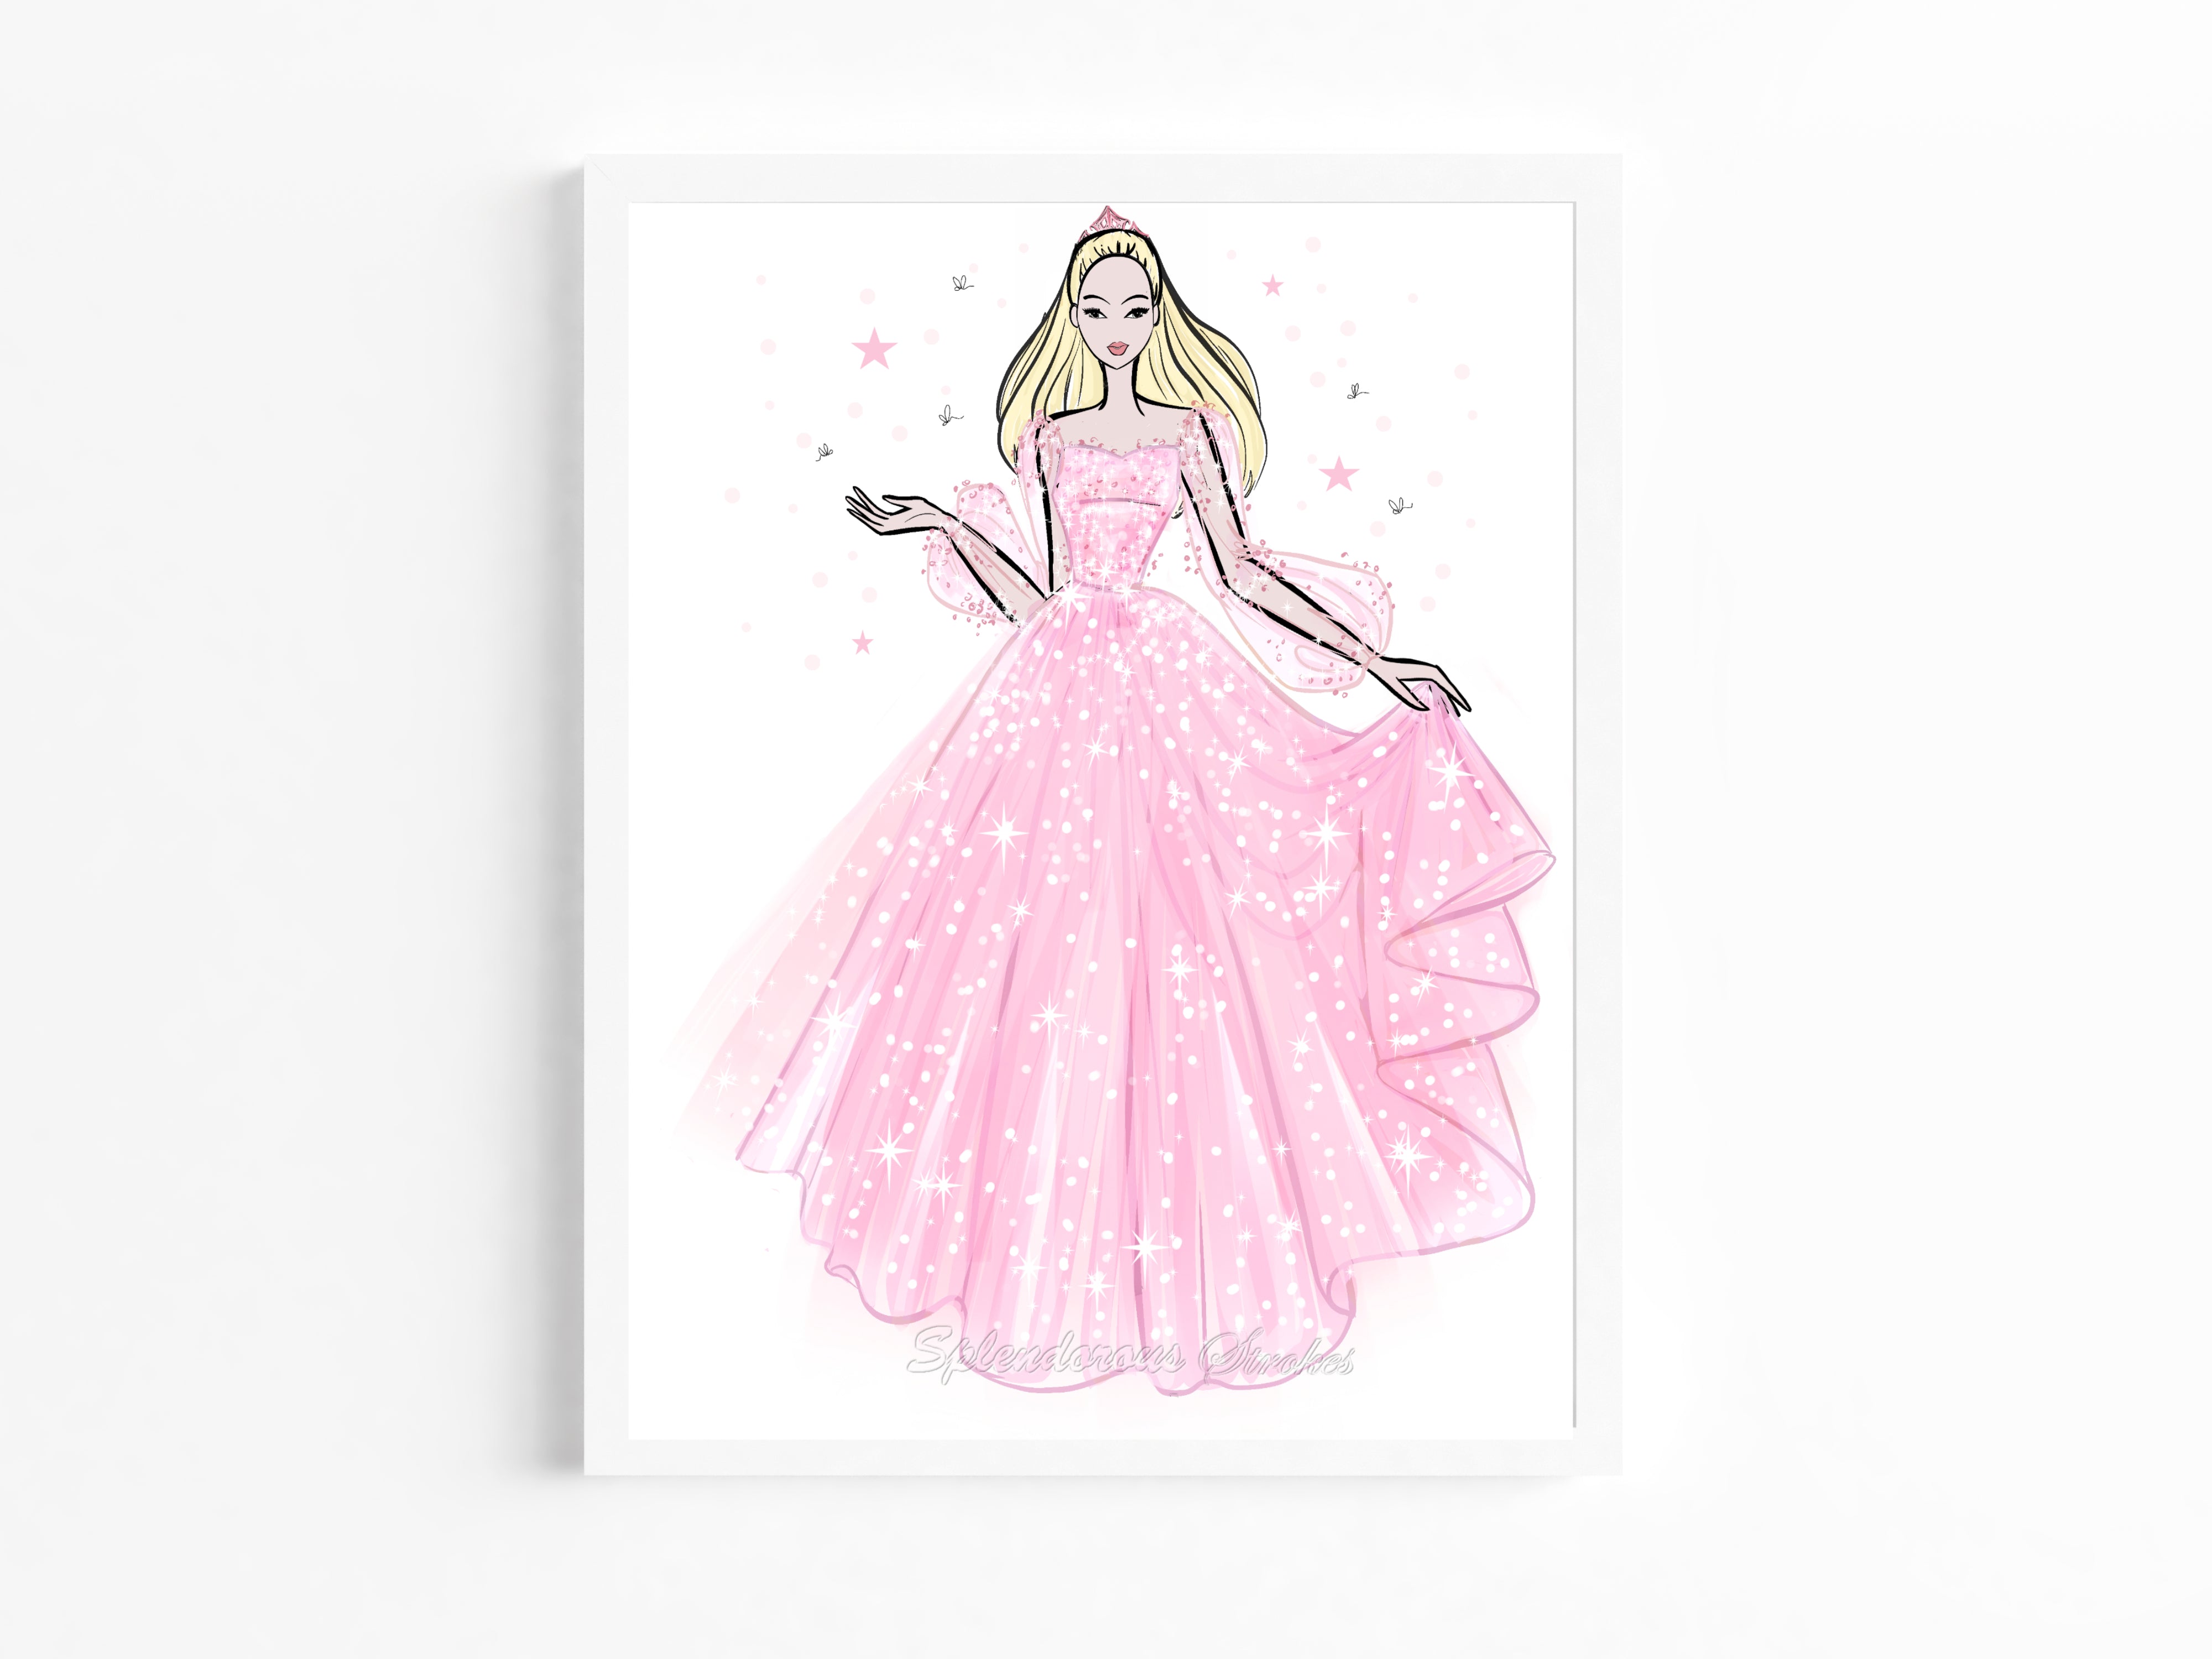 How to Draw Barbie Dress Coloring Pages | Learn to Draw Princess Dresses -  YouTube